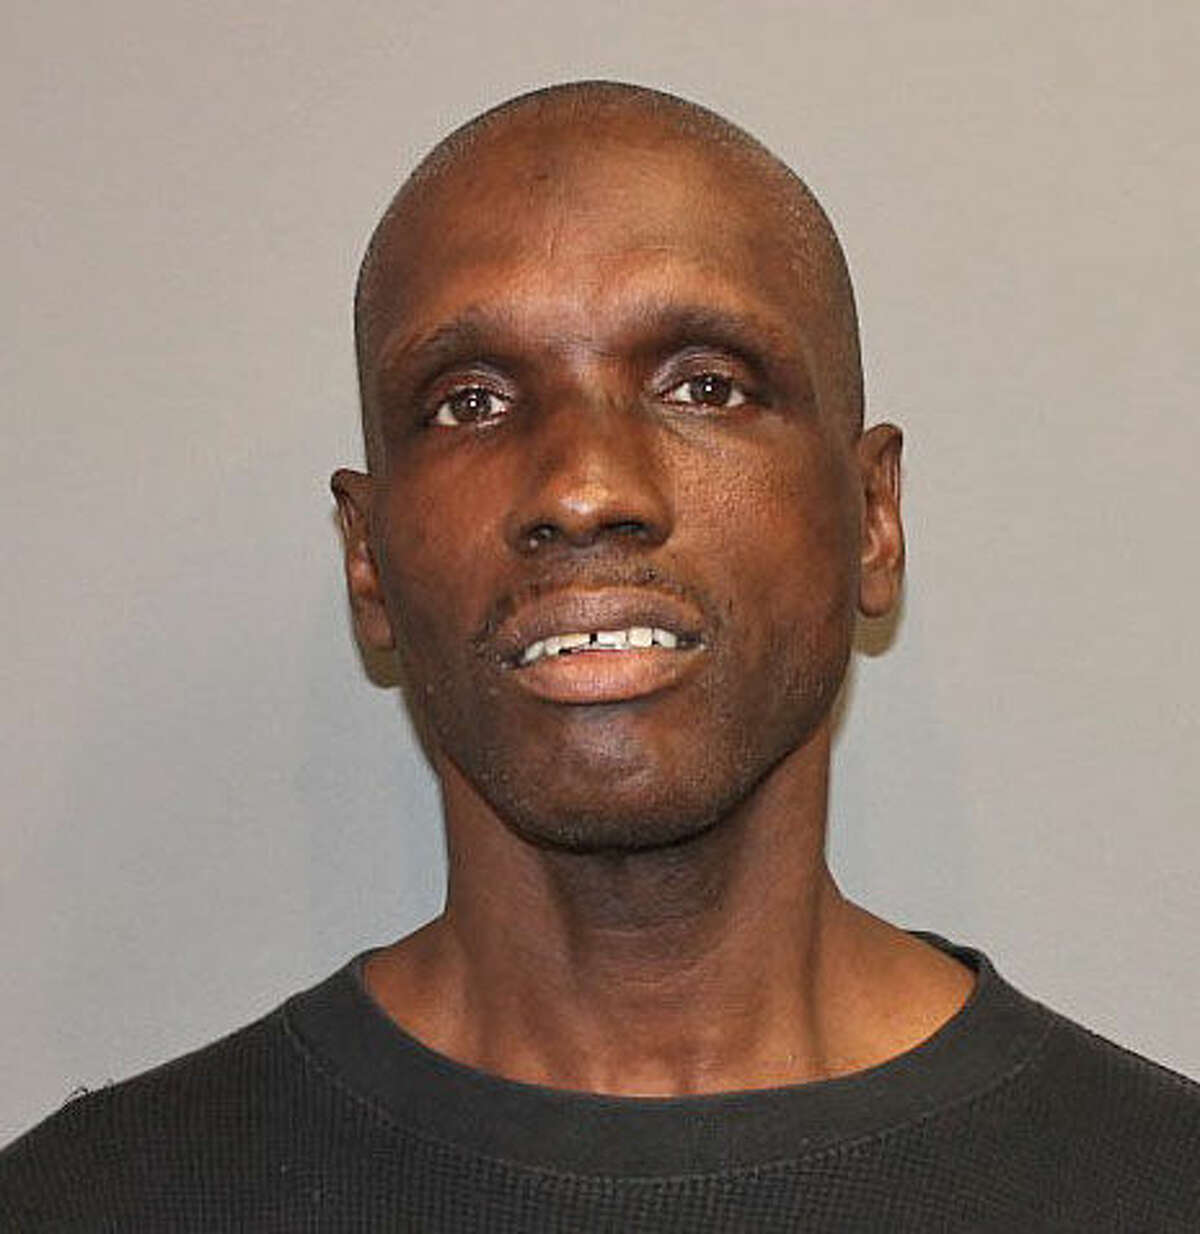 Melvin Marriner, 52, who gave his address as the city's shelter, was held on three misdemeanor warrants for failure to appear in court and one for failure to respond to an infraction. He was held on combined court set bonds of $23,000 and given a court date of May 19. (Photo: Contributed)